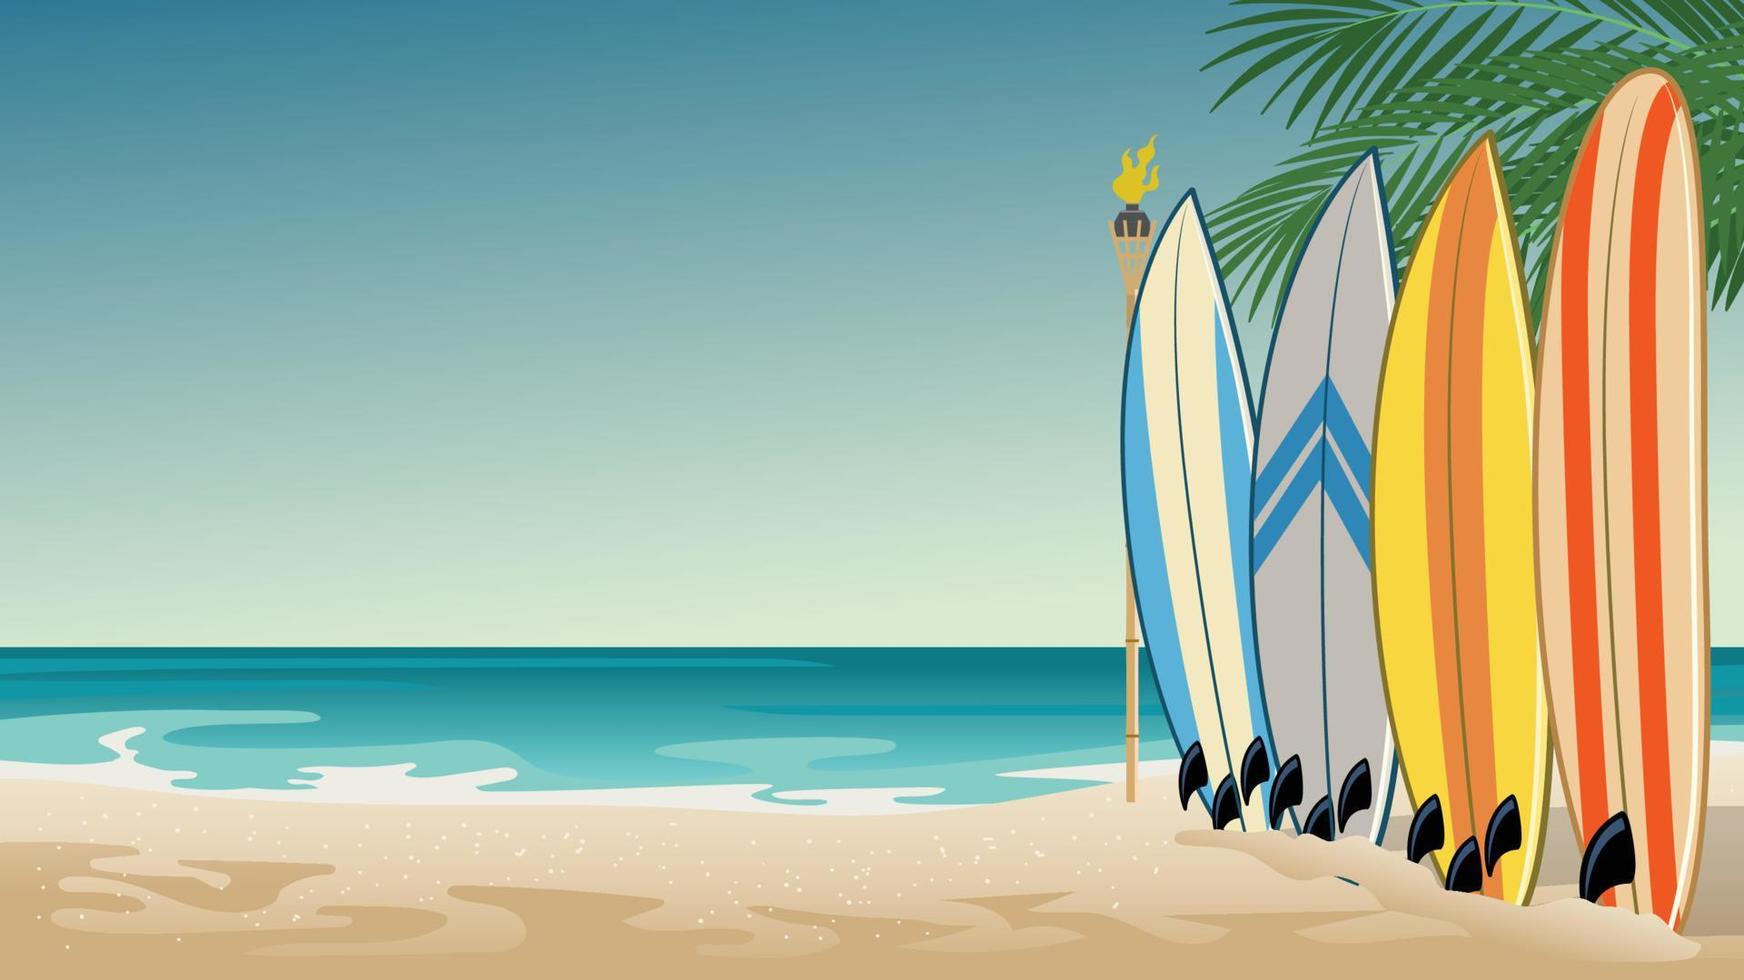 landscape of beach with some surfboards vector